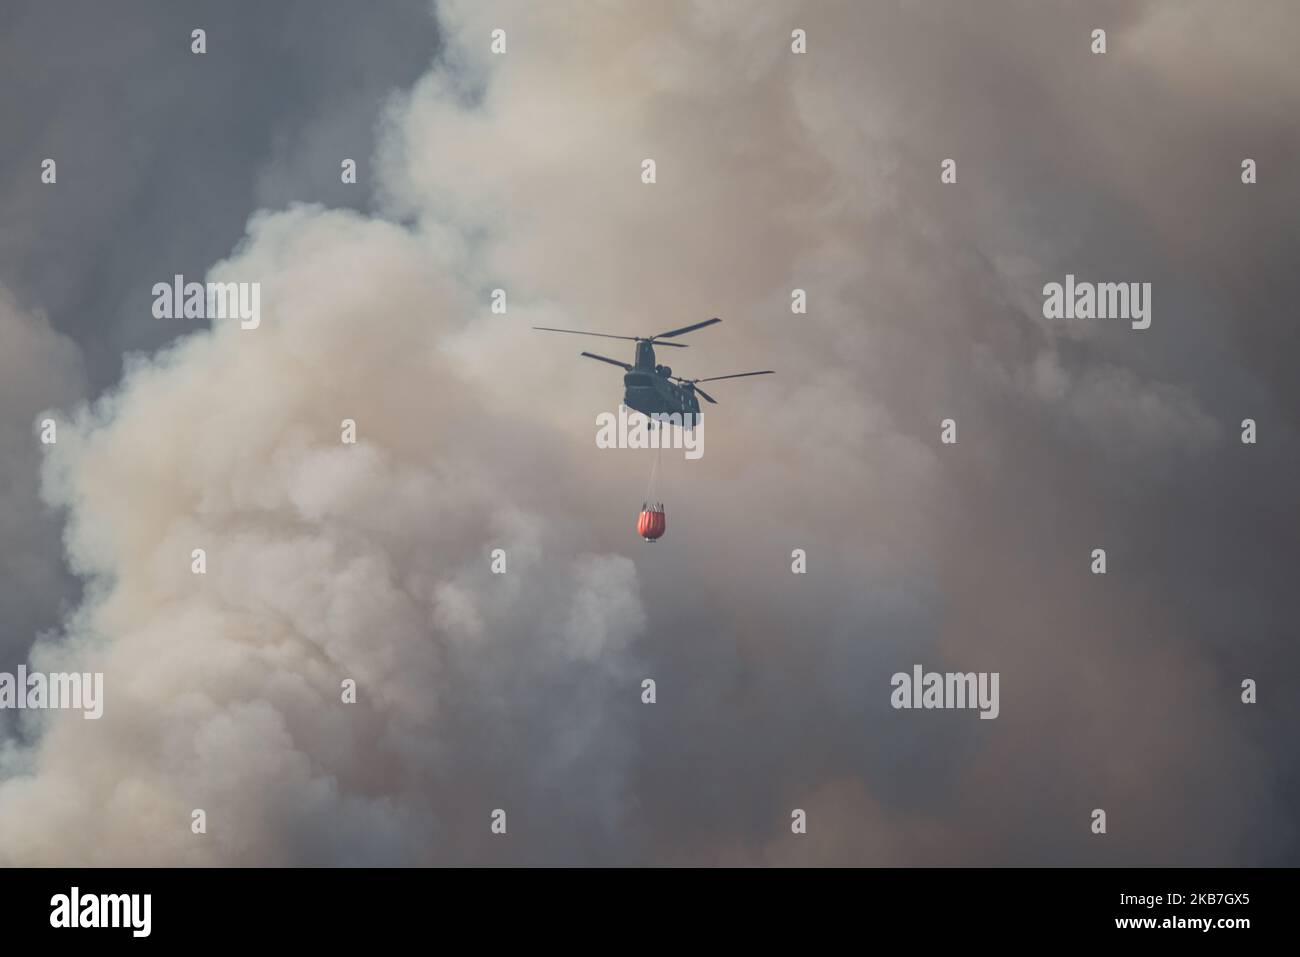 Helicopter pours water near Platania village in Evia, in Euboea, Greece, on August 14, 2019. (Photo by Wassilios Aswestopoulos/NurPhoto) Stock Photo